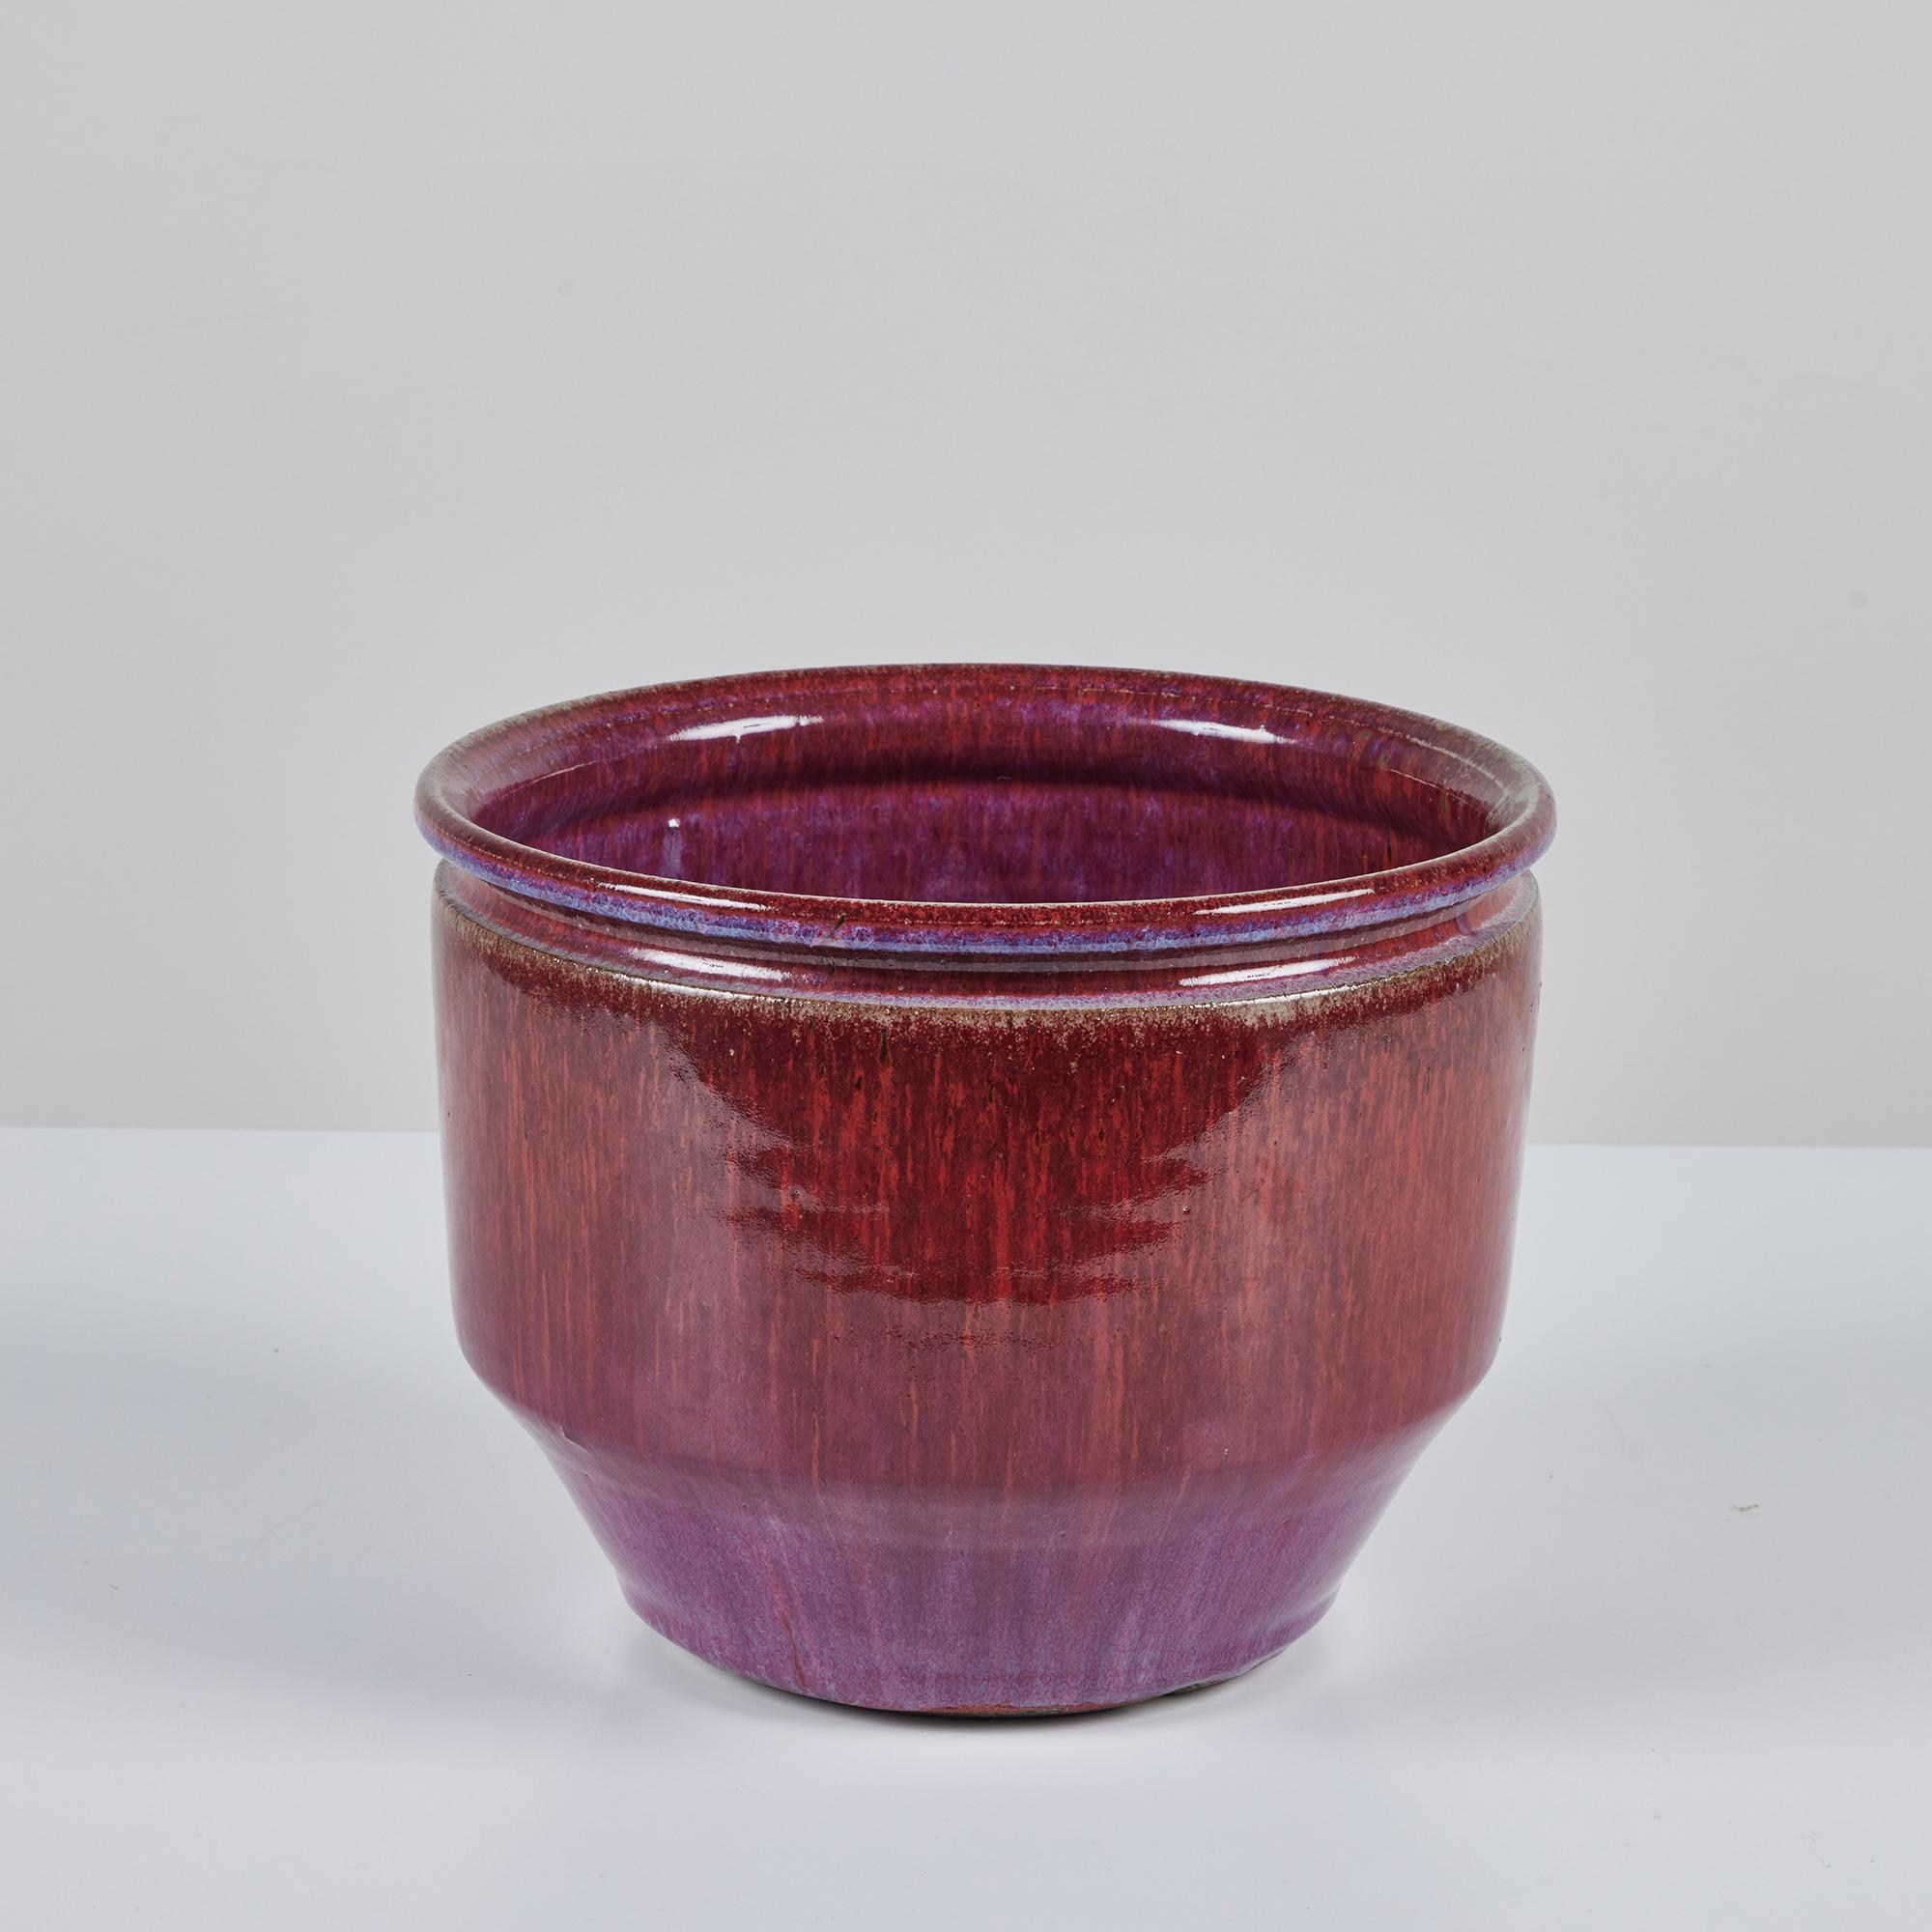 Ceramic bowl planter from David Cressey and Robert Maxwell for Earthgender. The table top sized planter has an ombre glazed interior and exterior ranging in colors of purple, pink and blue with slightly bowed sides and a flattened lip.